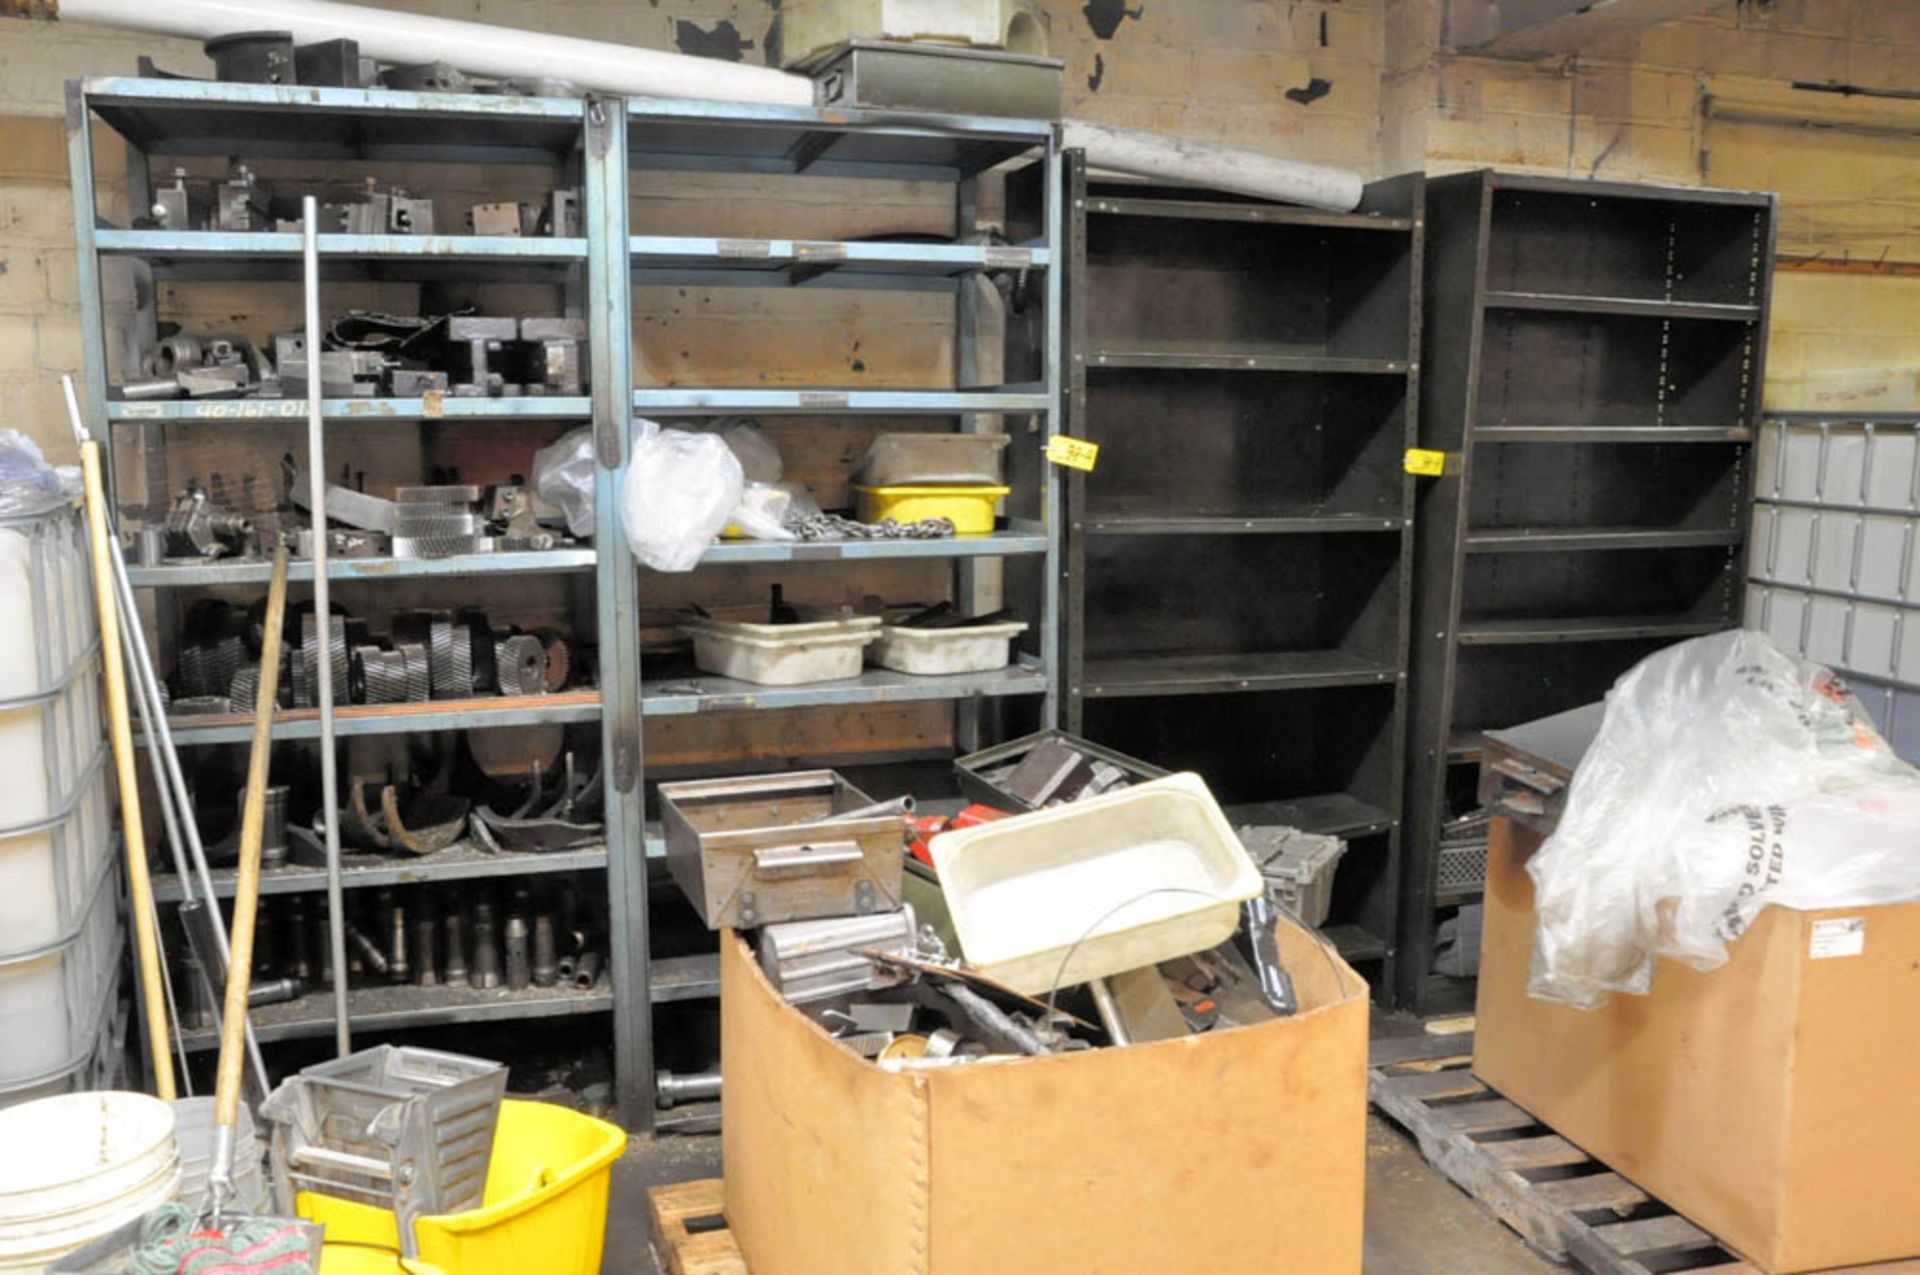 (4) SECTIONS SHELVING WITH CHANGE GEARS, COLLETS, MACHINE PARTS, ETC. - Image 3 of 3